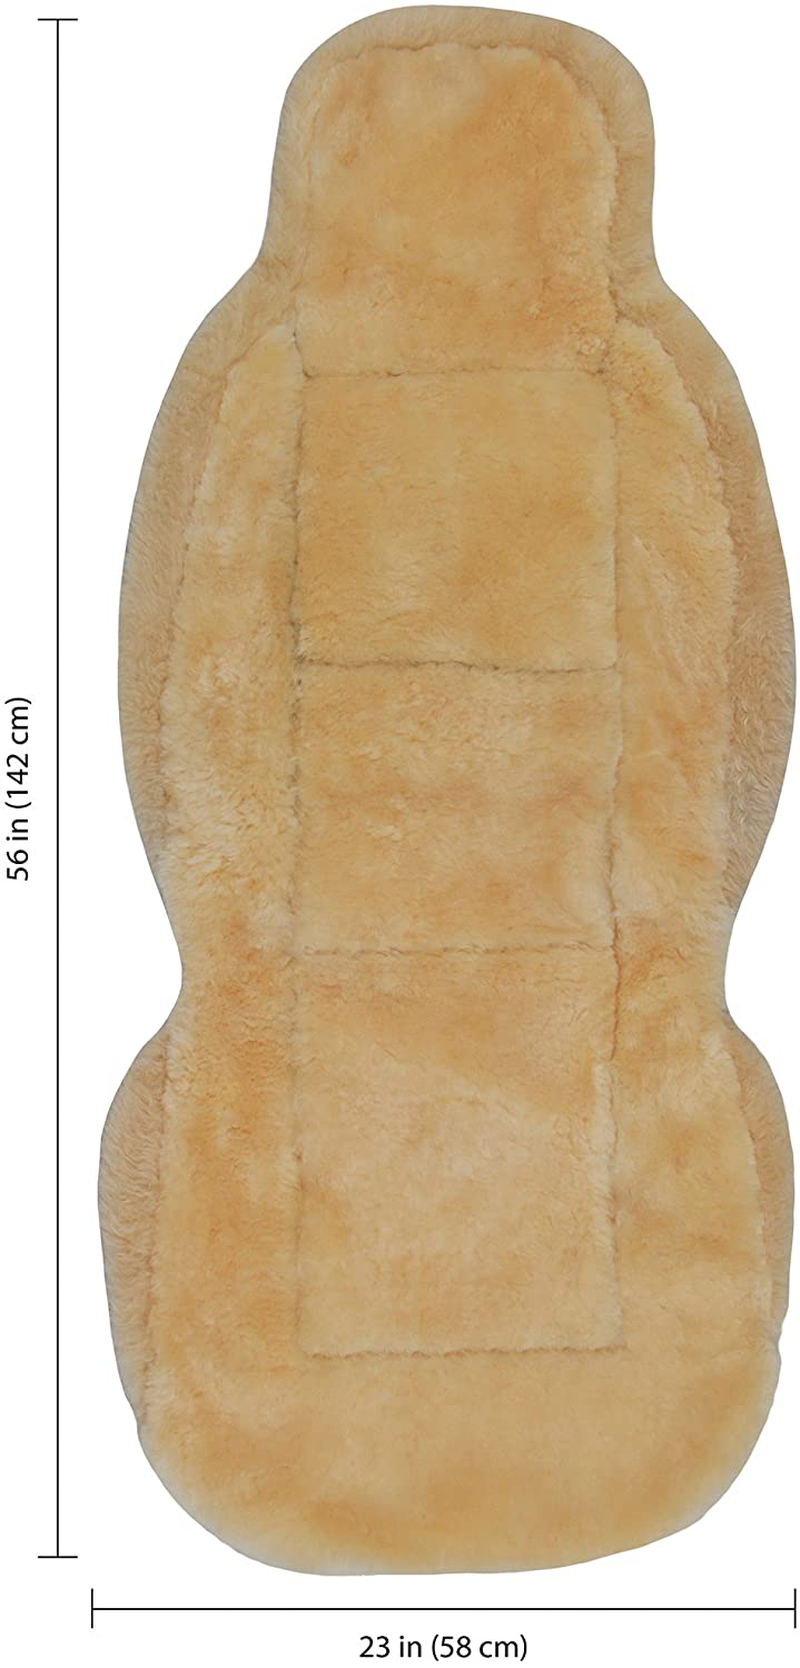 Eurow Sheepskin Seat Cover, 56 by 23 Inches, Champagne Vehicles & Parts > Vehicle Parts & Accessories > Motor Vehicle Parts > Motor Vehicle Seating ‎Eurow & O'Reilly Corp.   